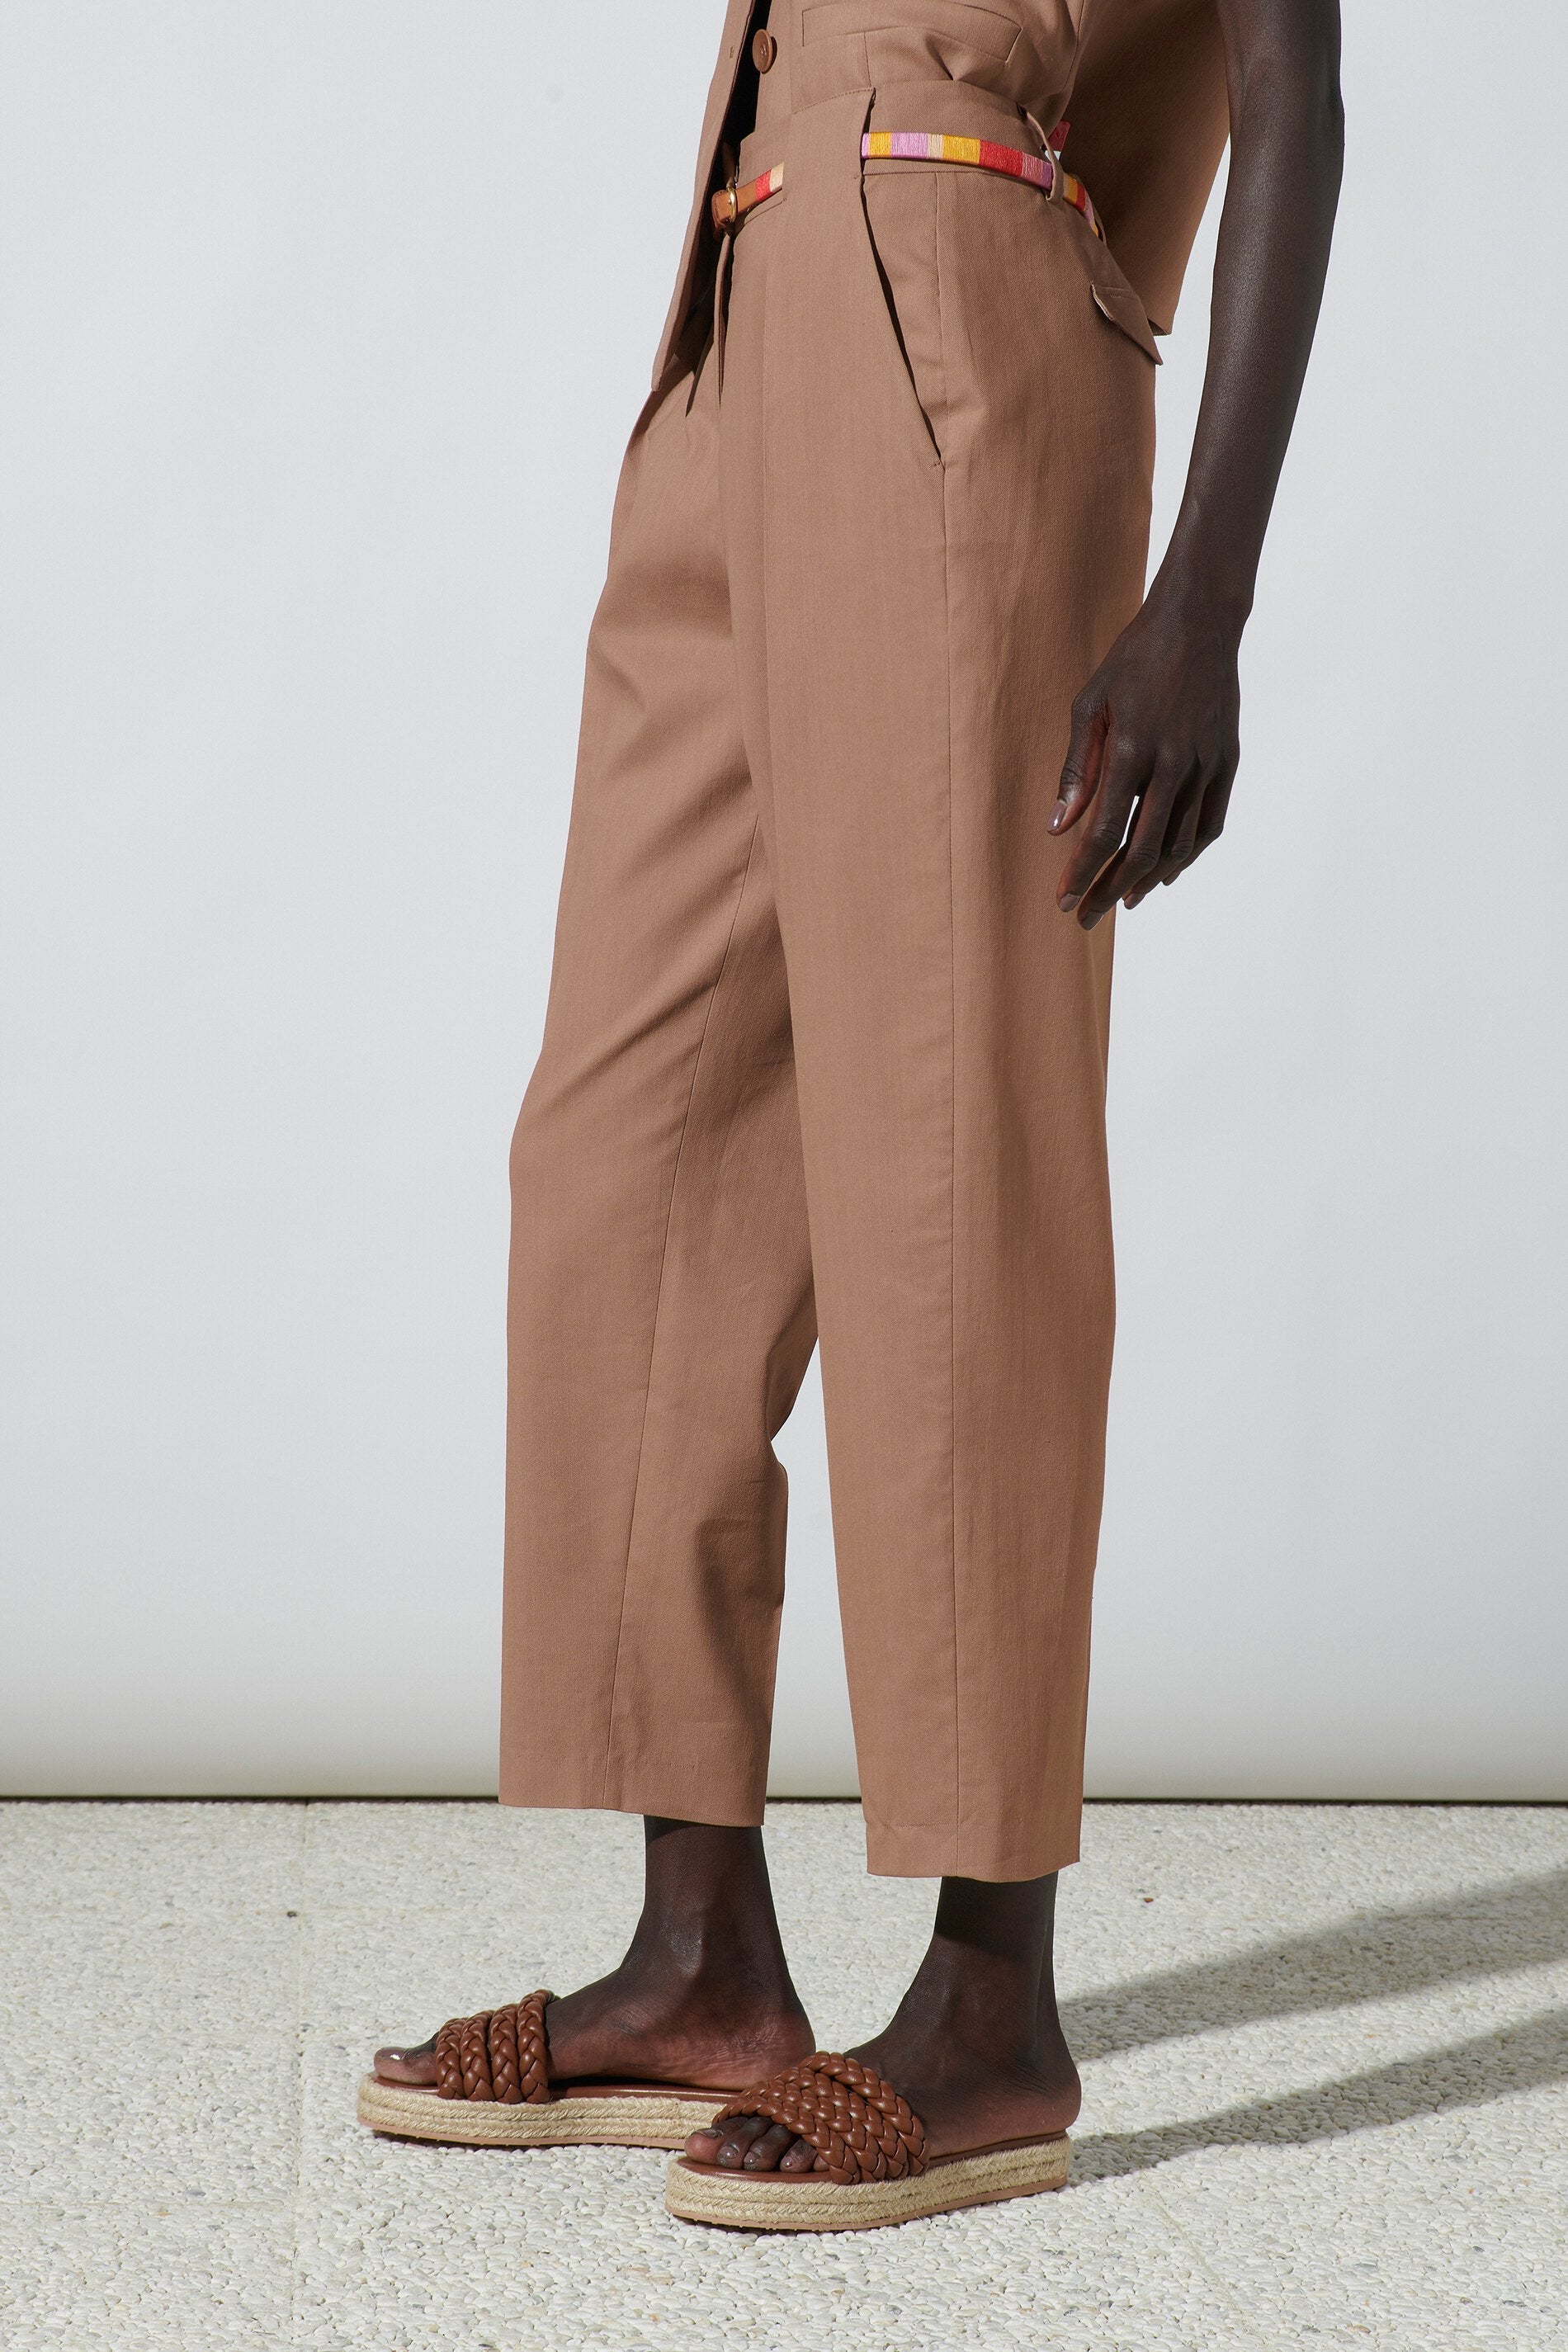 LUISA-CERANO-OUTLET-SALE-Gabardine-Tapered-Pants-Hosen-ARCHIVE-COLLECTION-3_2847add4-8763-4ca7-b6c1-5aa7d864dd9c.jpg